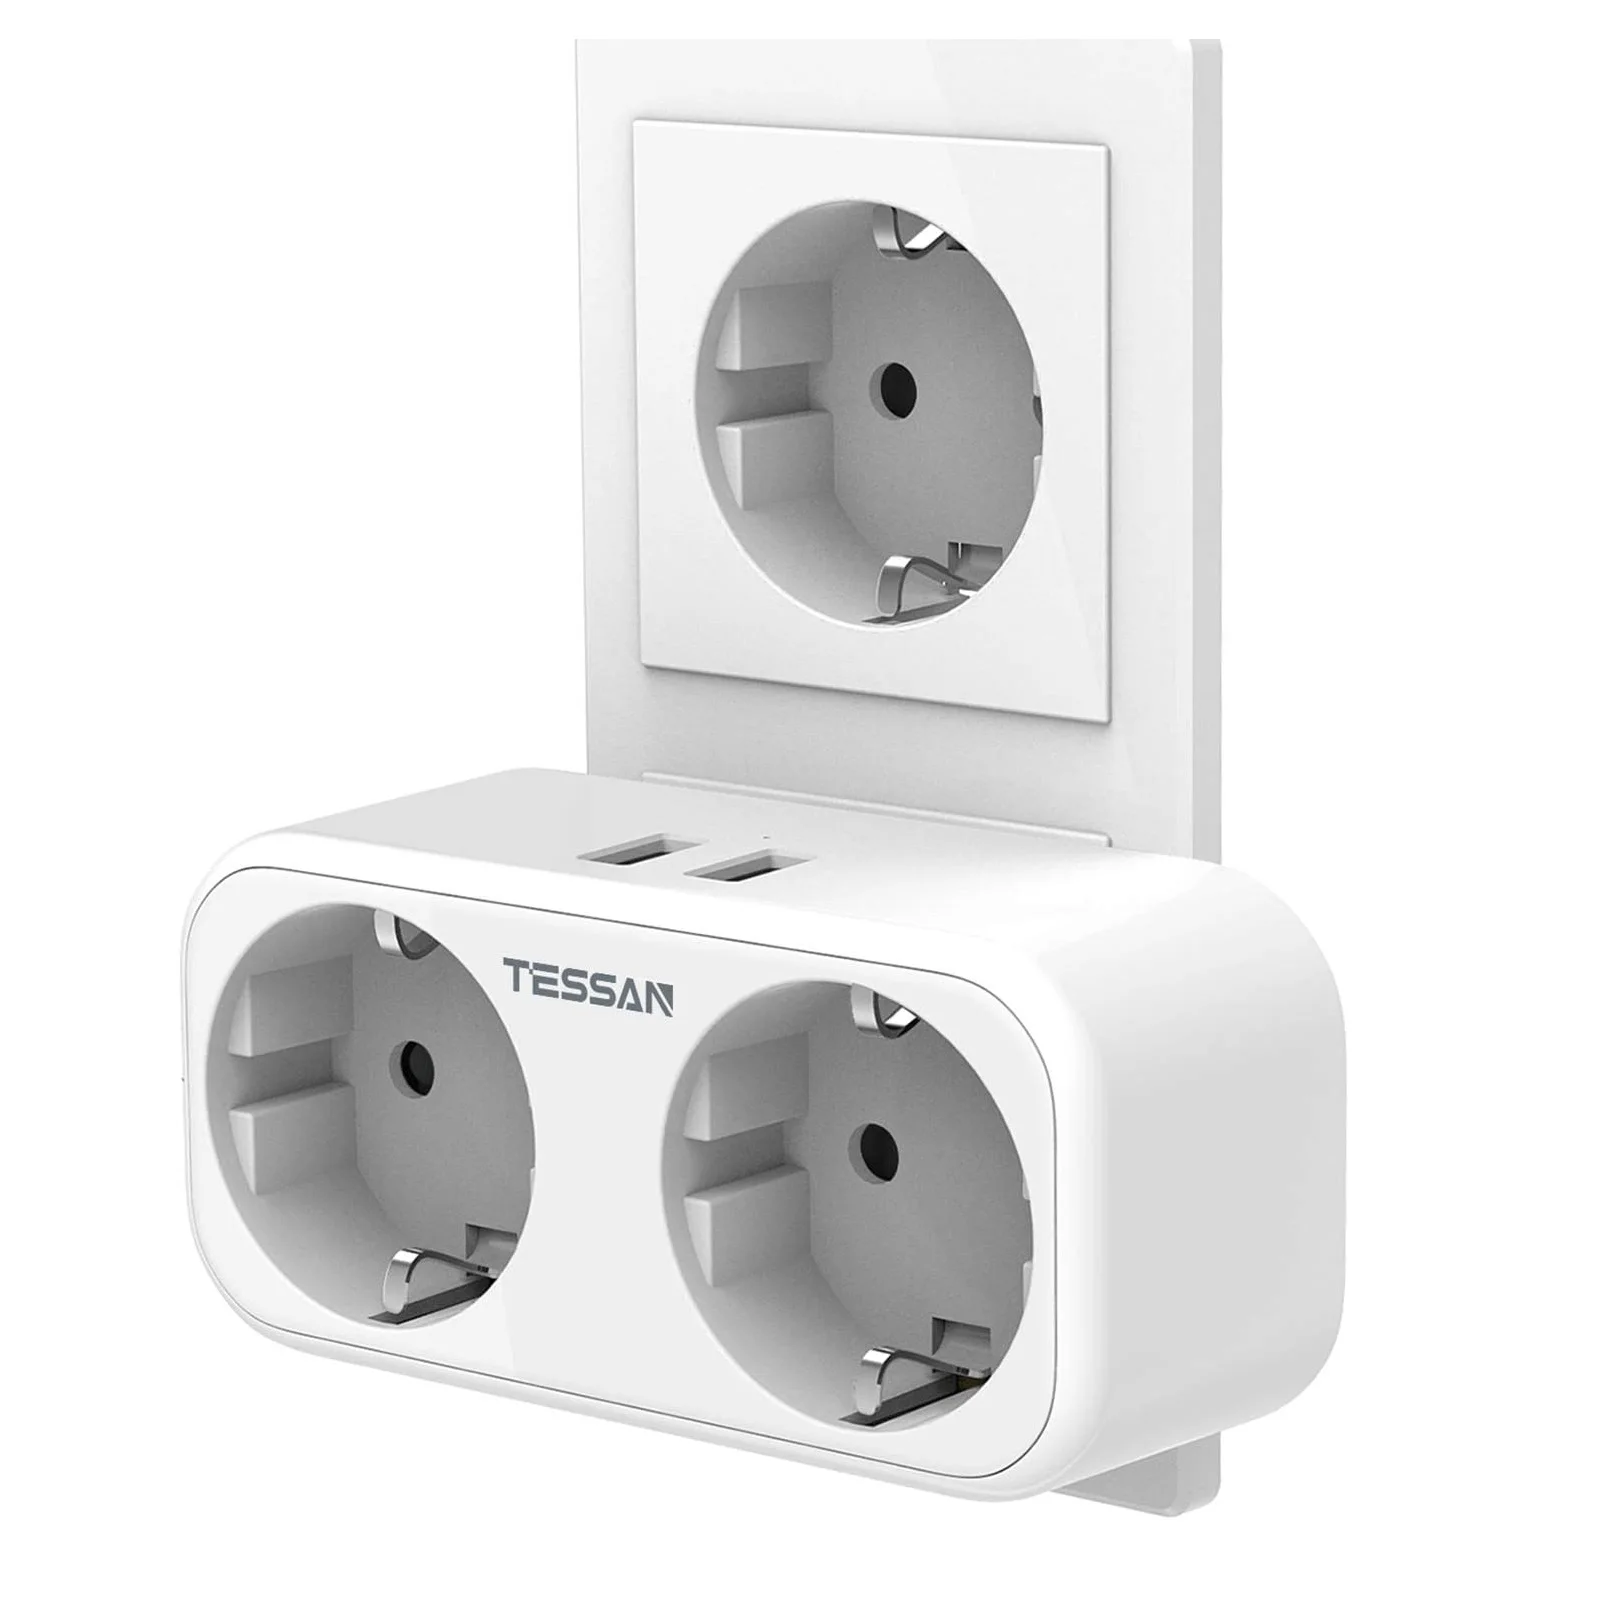 

TESSAN European Multi Outlets Wall Socket Extender with AC Outlets and USB Ports, EU KR Plug Power Strip Socket Adapter for Home